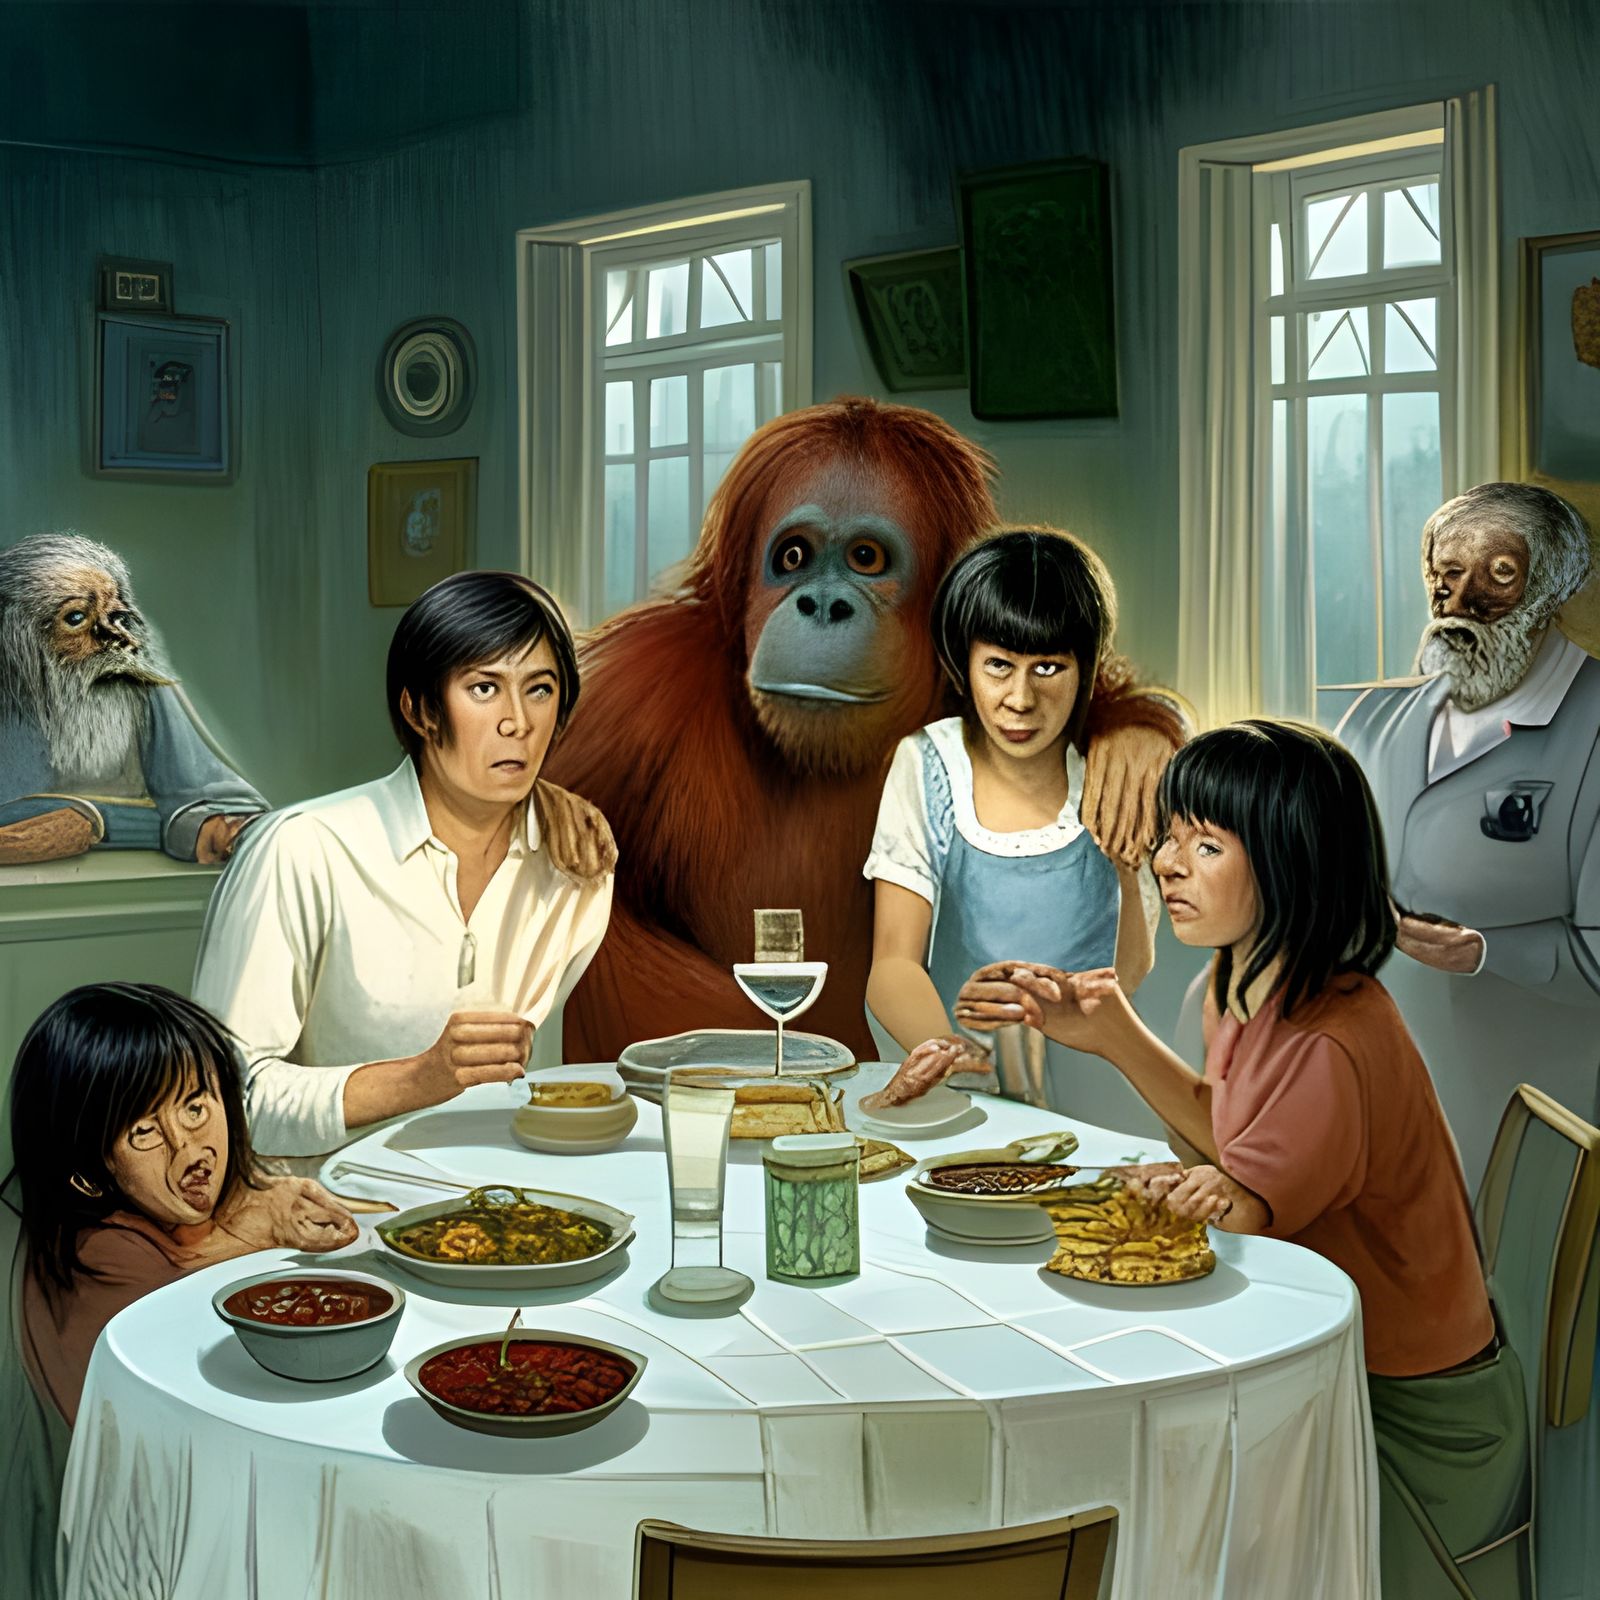 1980's family gathering to eat with an orangutang